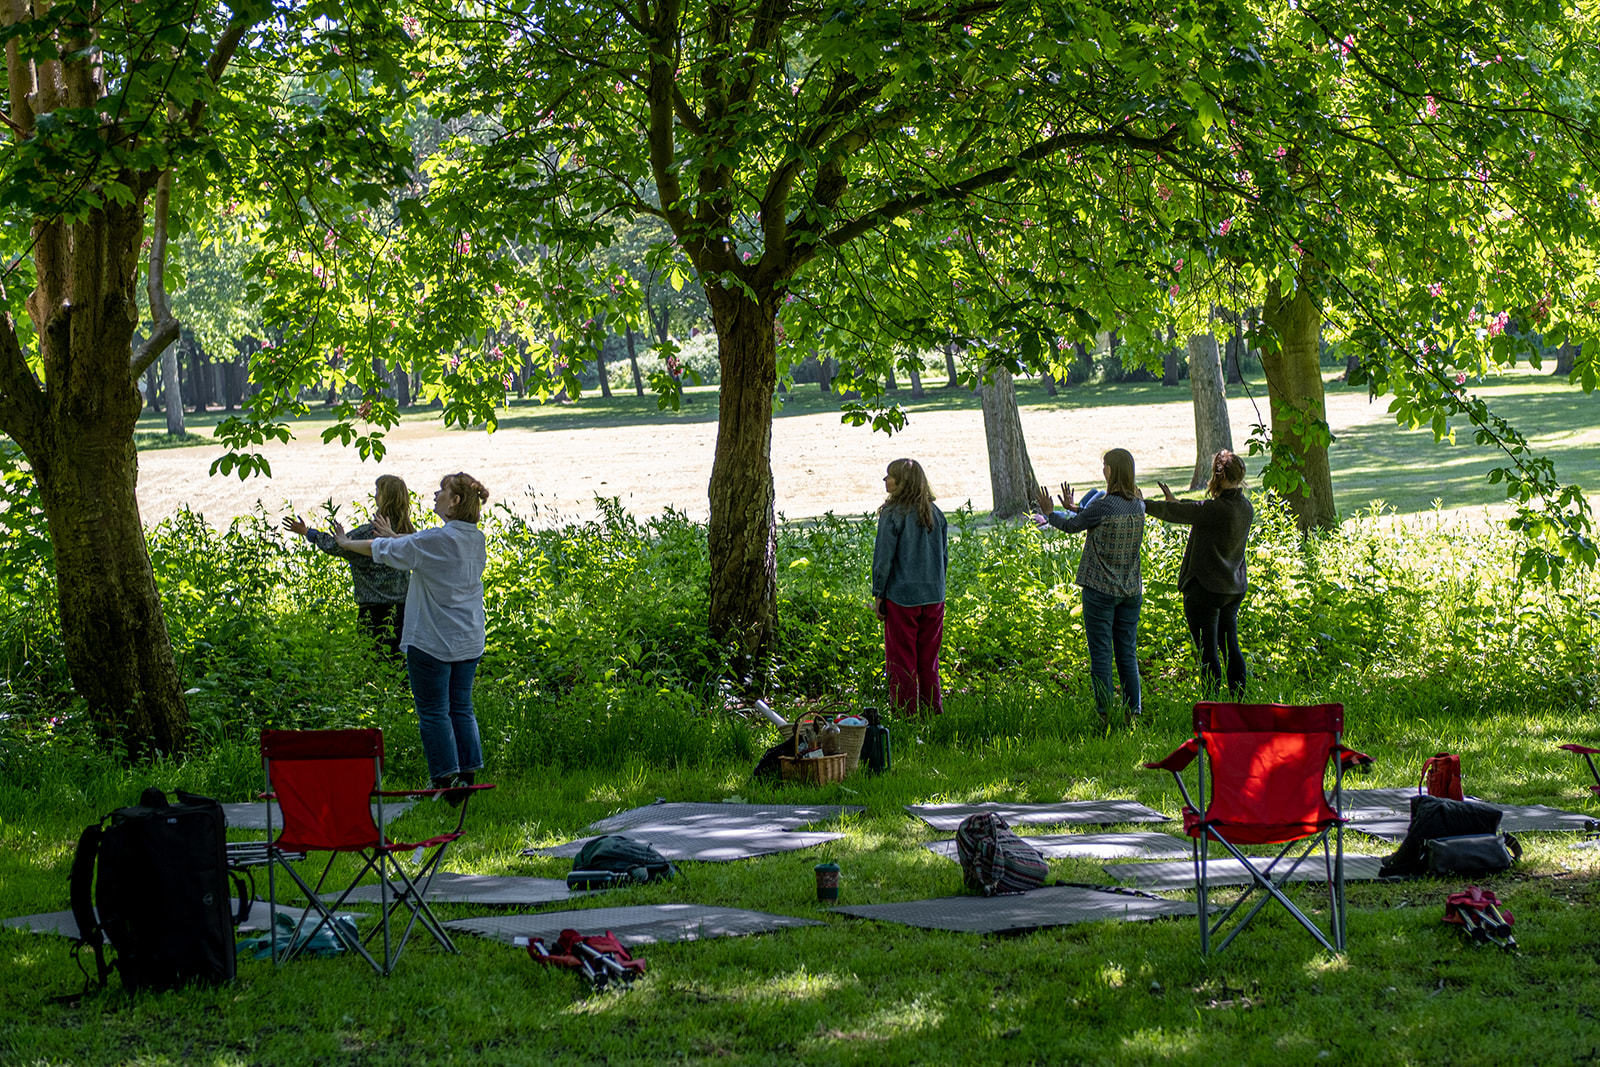 5 people stand in a line facing trees, they have their palms stretched in front of them facing the trees. Behind them are mats and camp chairs laid out on the grass. It is a sunny day.